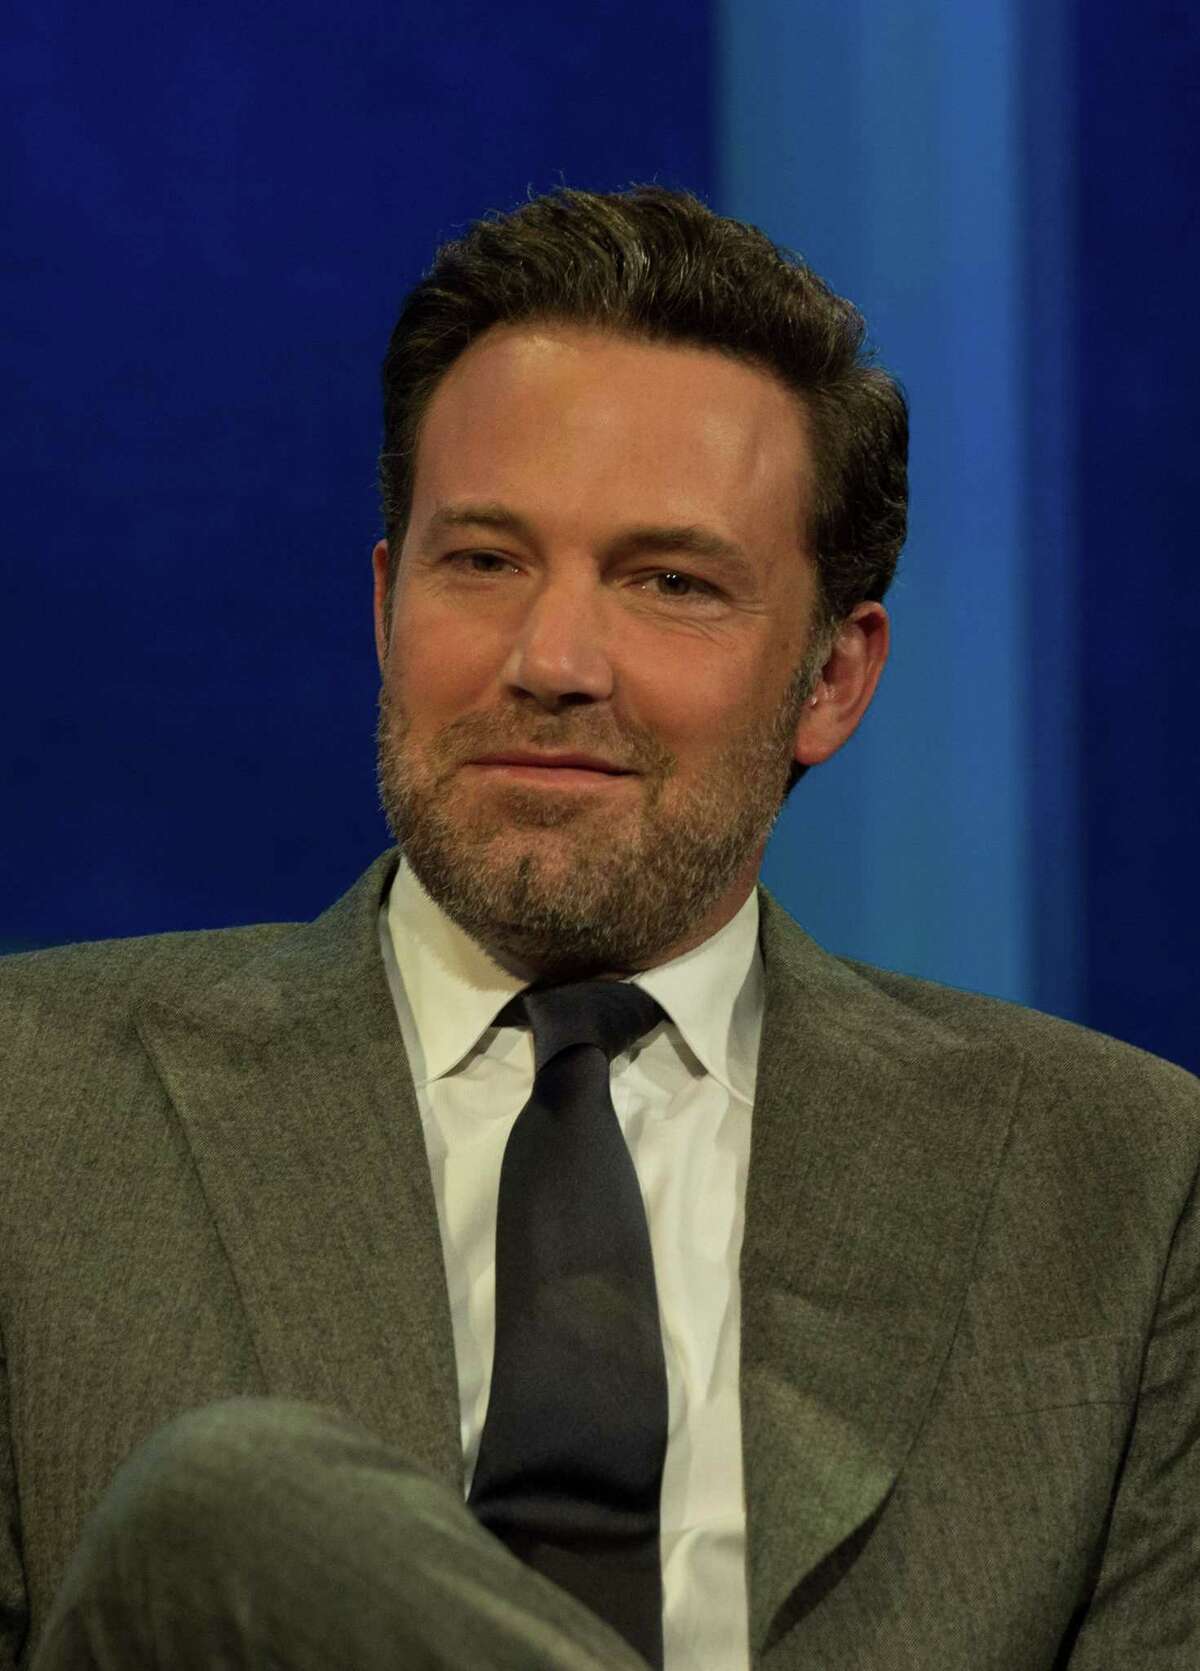 Actor and activist Ben Affleck looks on at the closing Plenary Session: Imagine All The People at the Clinton Global Initiative, on September, 21, 2016 in New York. / AFP PHOTO / Bryan R. SmithBRYAN R. SMITH/AFP/Getty Images